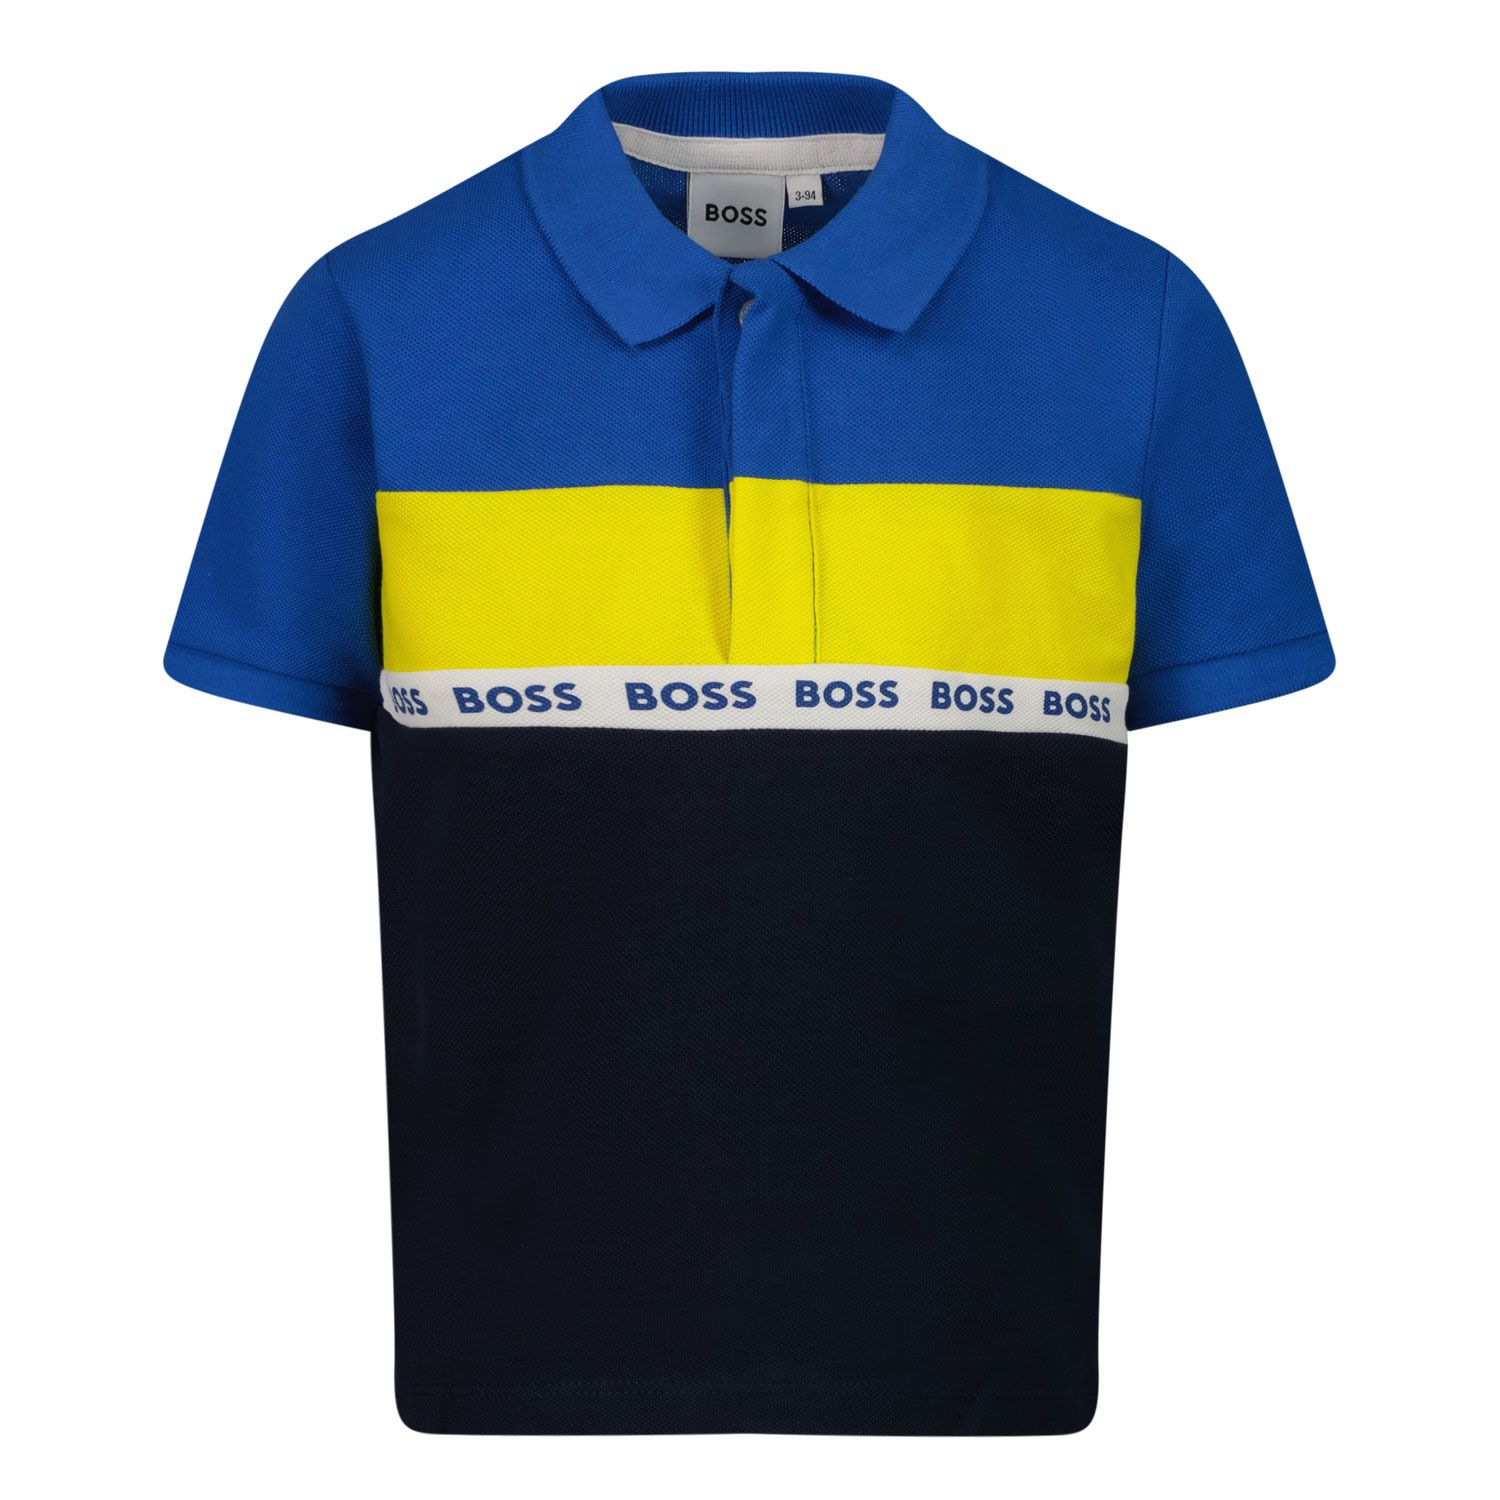 Picture of Boss J05925 baby poloshirt navy